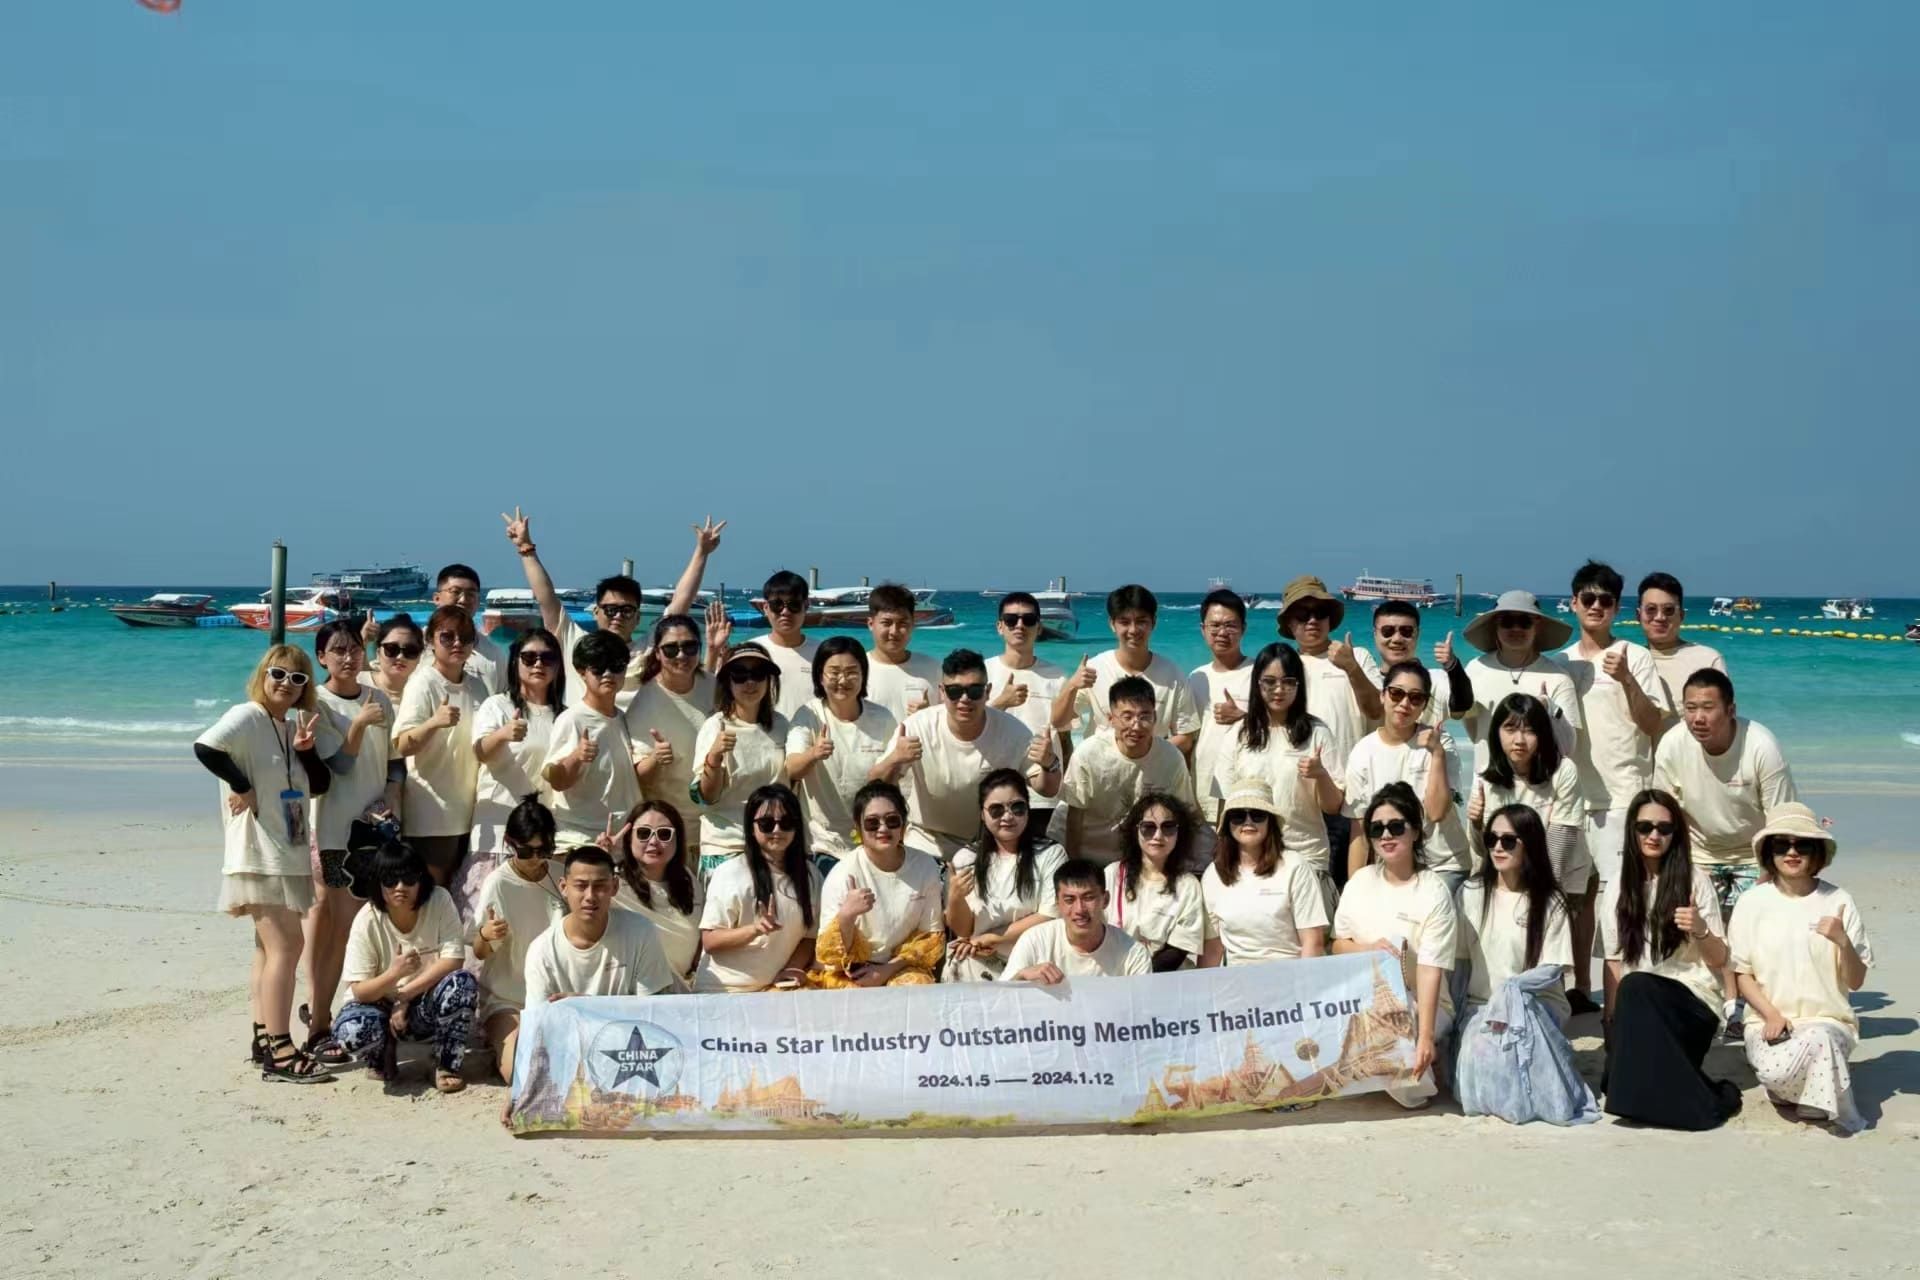 China Star industry Outstanding Members Thailand Tour